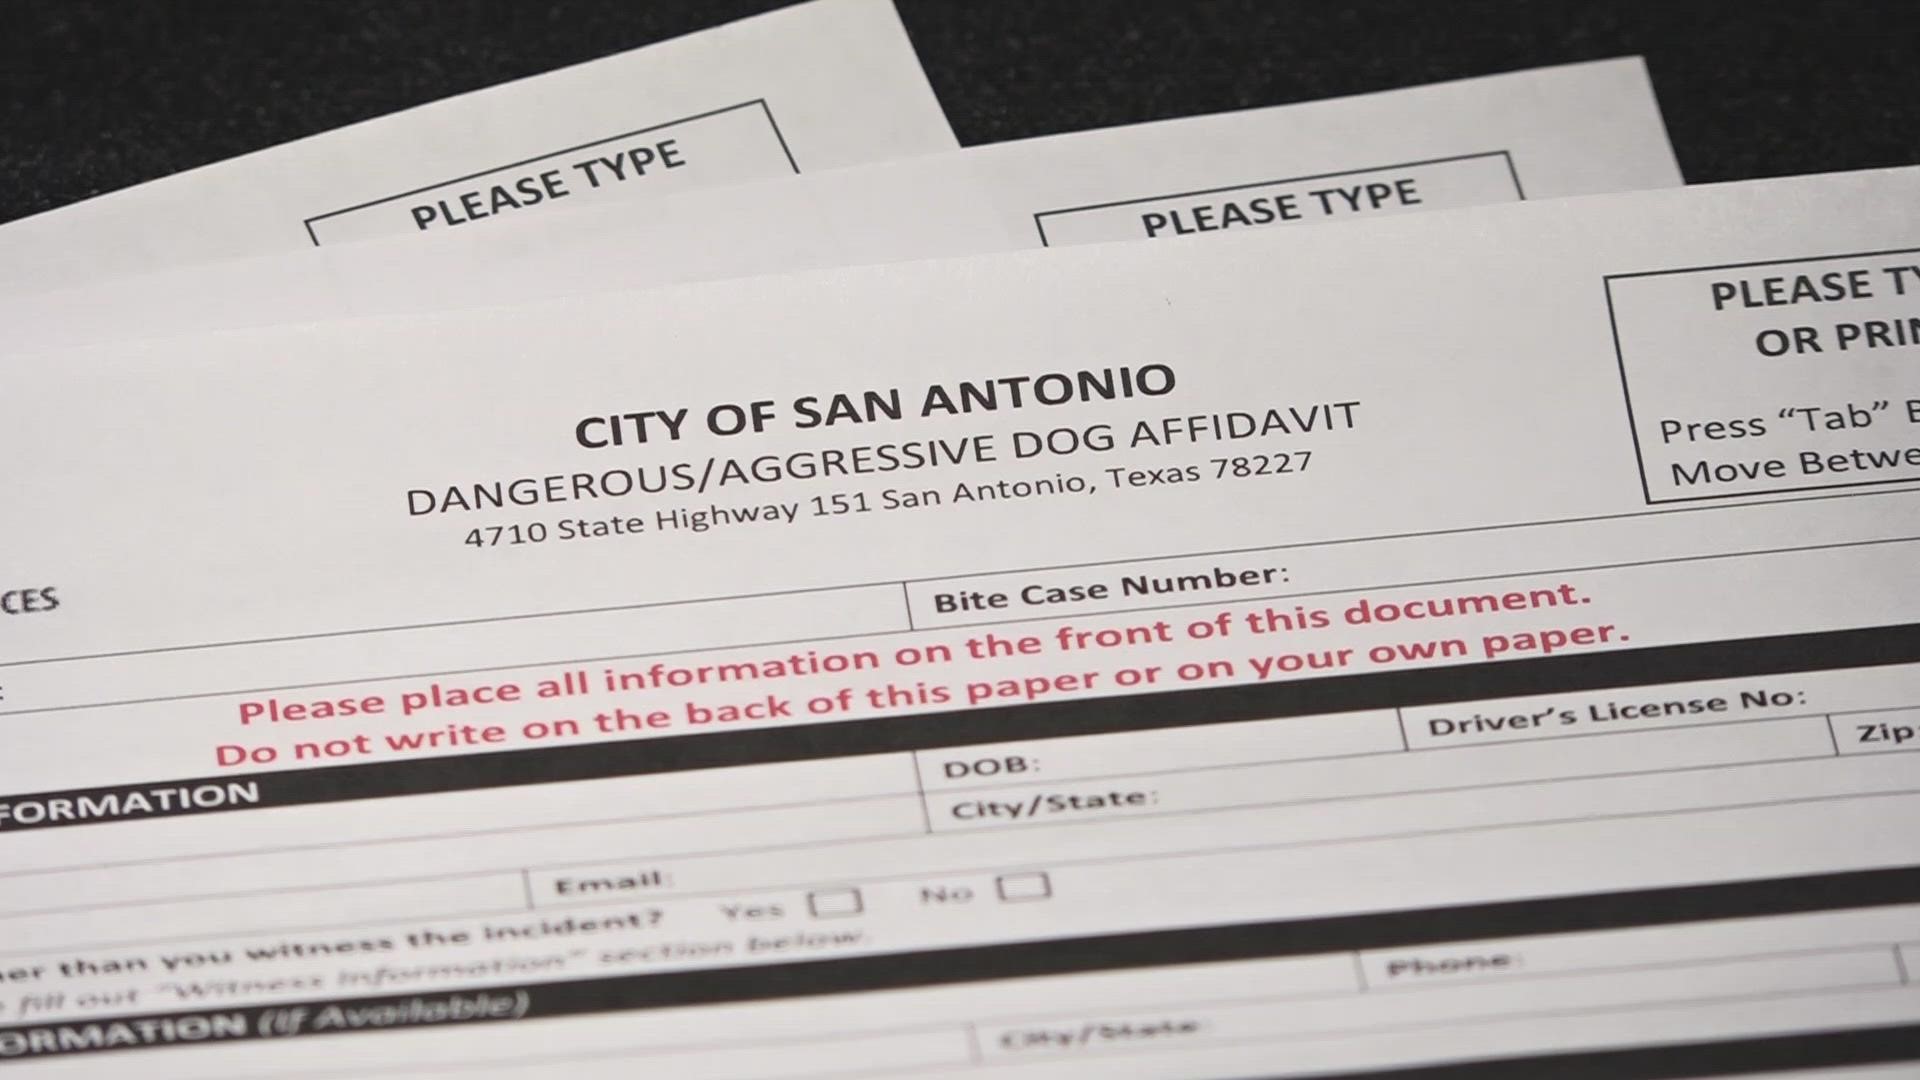 Dangerous dog affidavits allow ACS to investigate dog attacks, and over a hundred dogs in San Antonio are designated as dangerous.